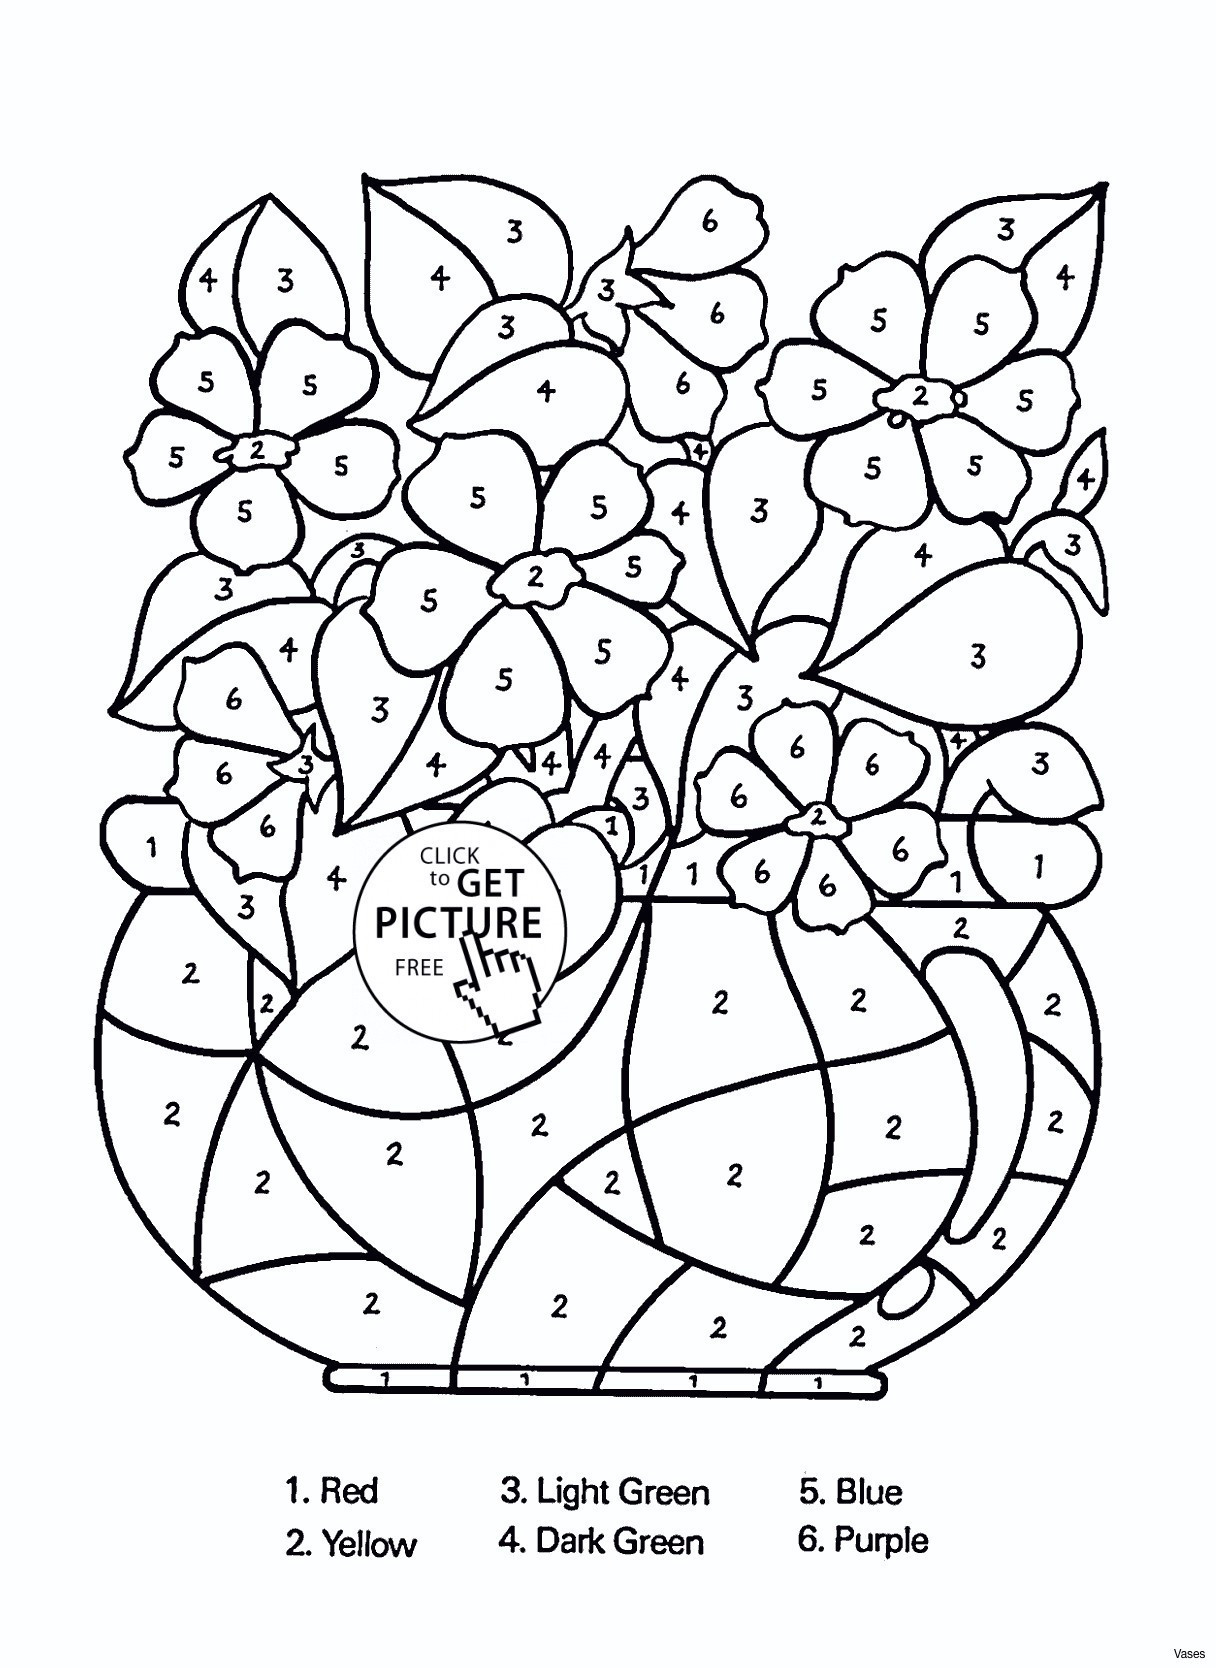 Seashells In Glass Vase Of Template Coloring Jagadishshettar Com with Regard to Invitations Template New Free Printable Pokemon Coloring Pages Awesome Coloring Printables 0d